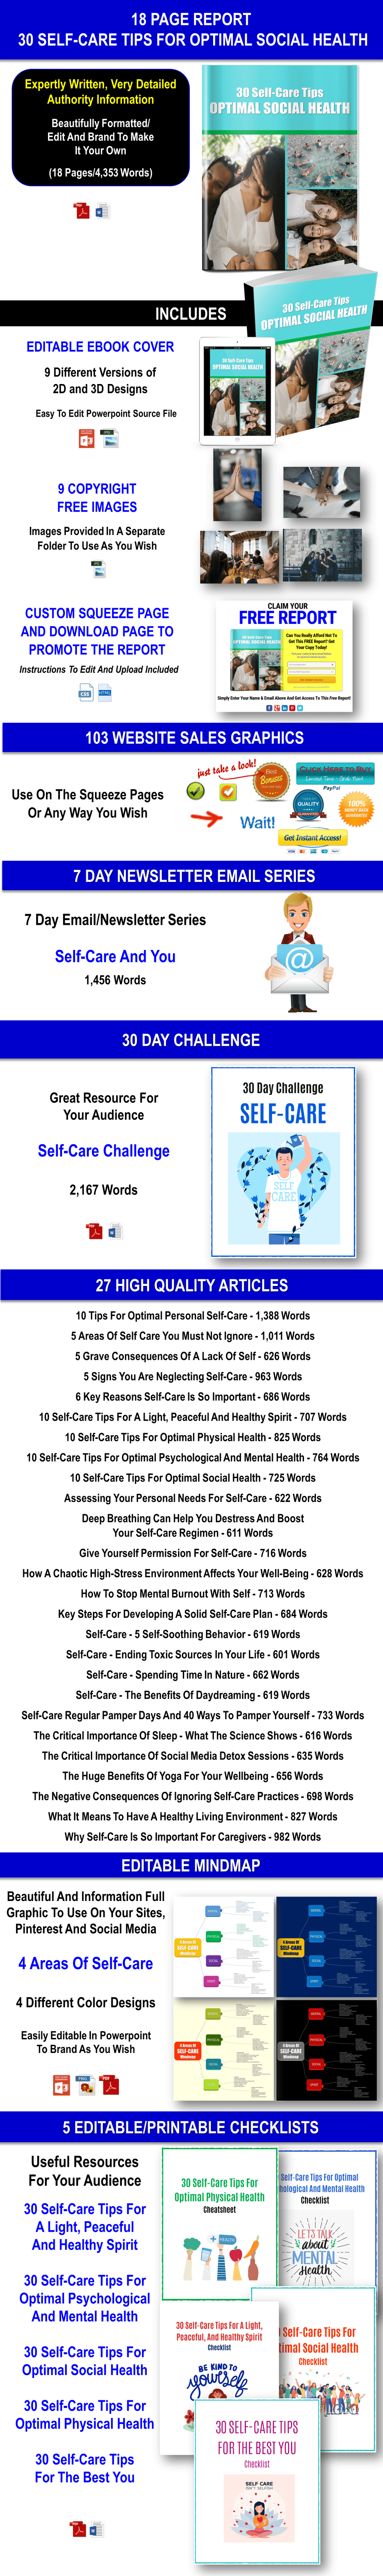 Holistic Self-Care For Mind, Body And Spirit Giant PLR